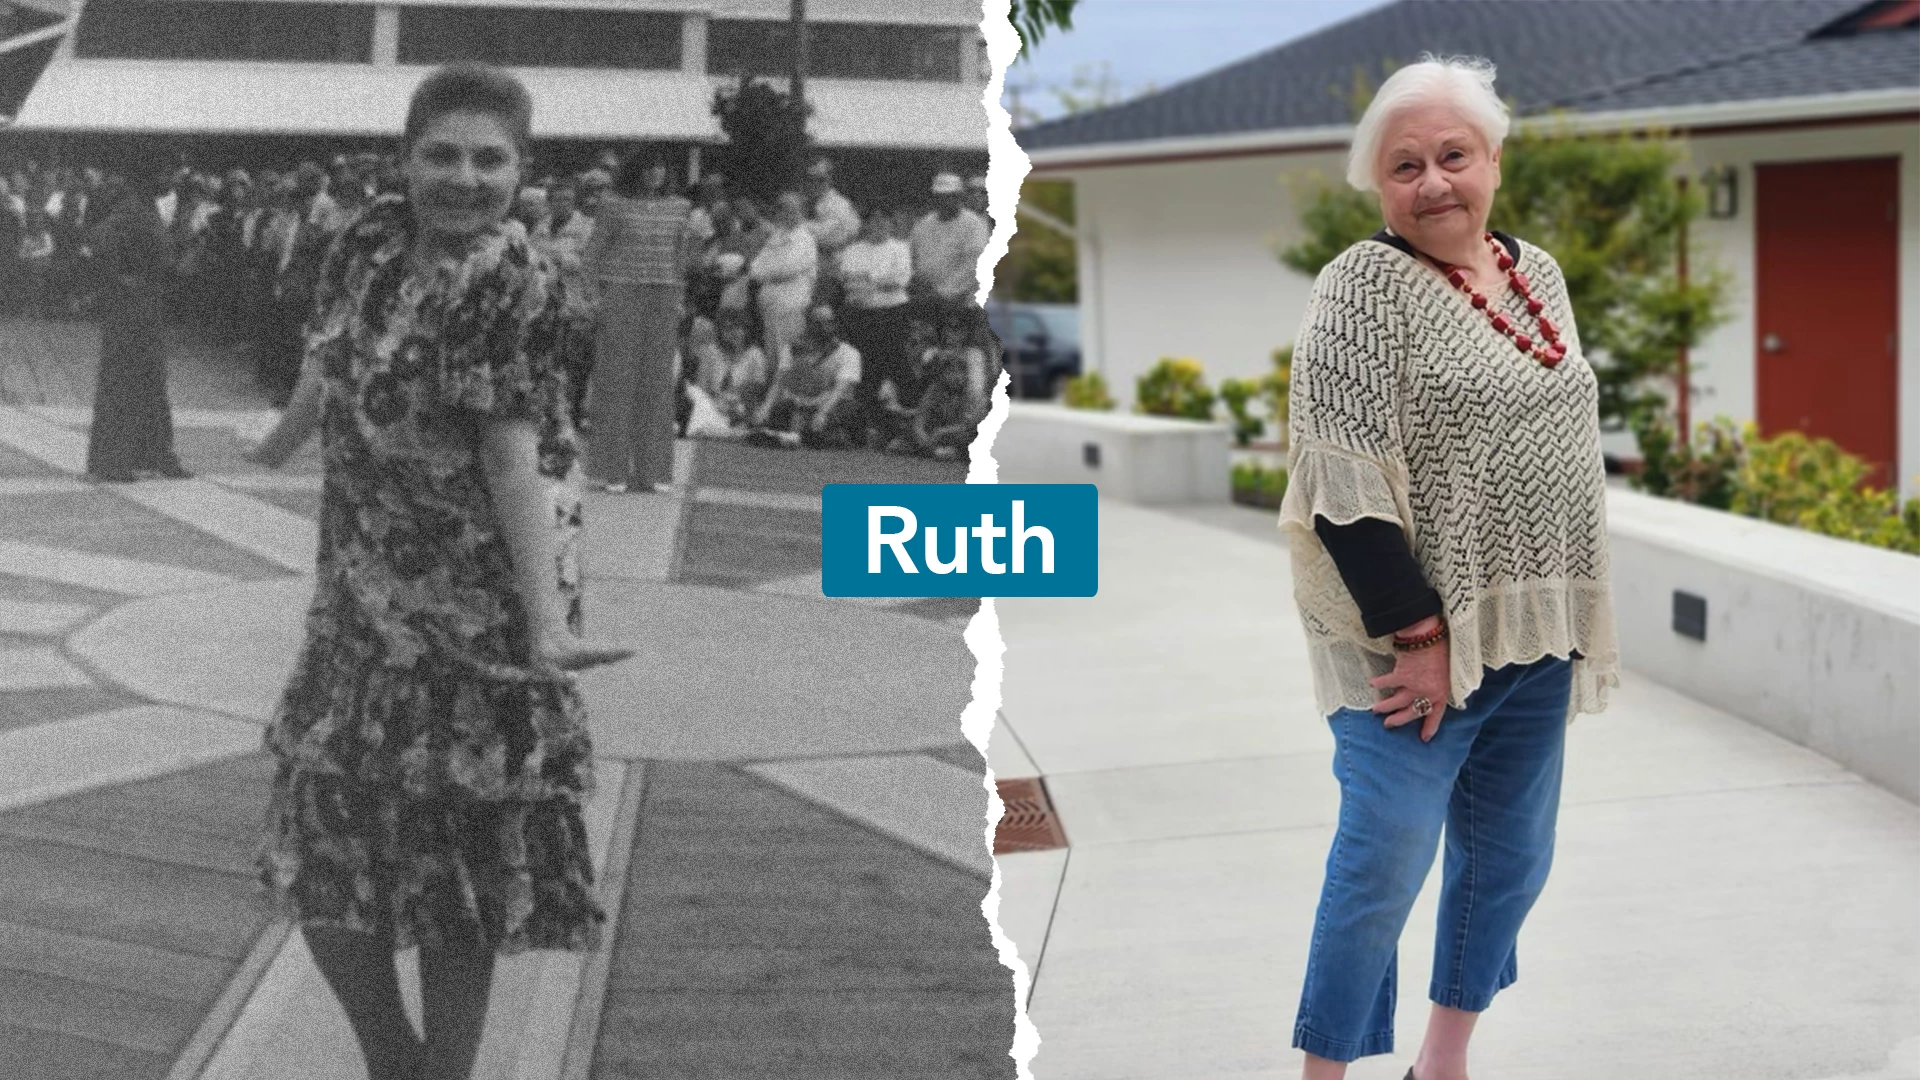 An old photo of ruth and a new photo of ruth.